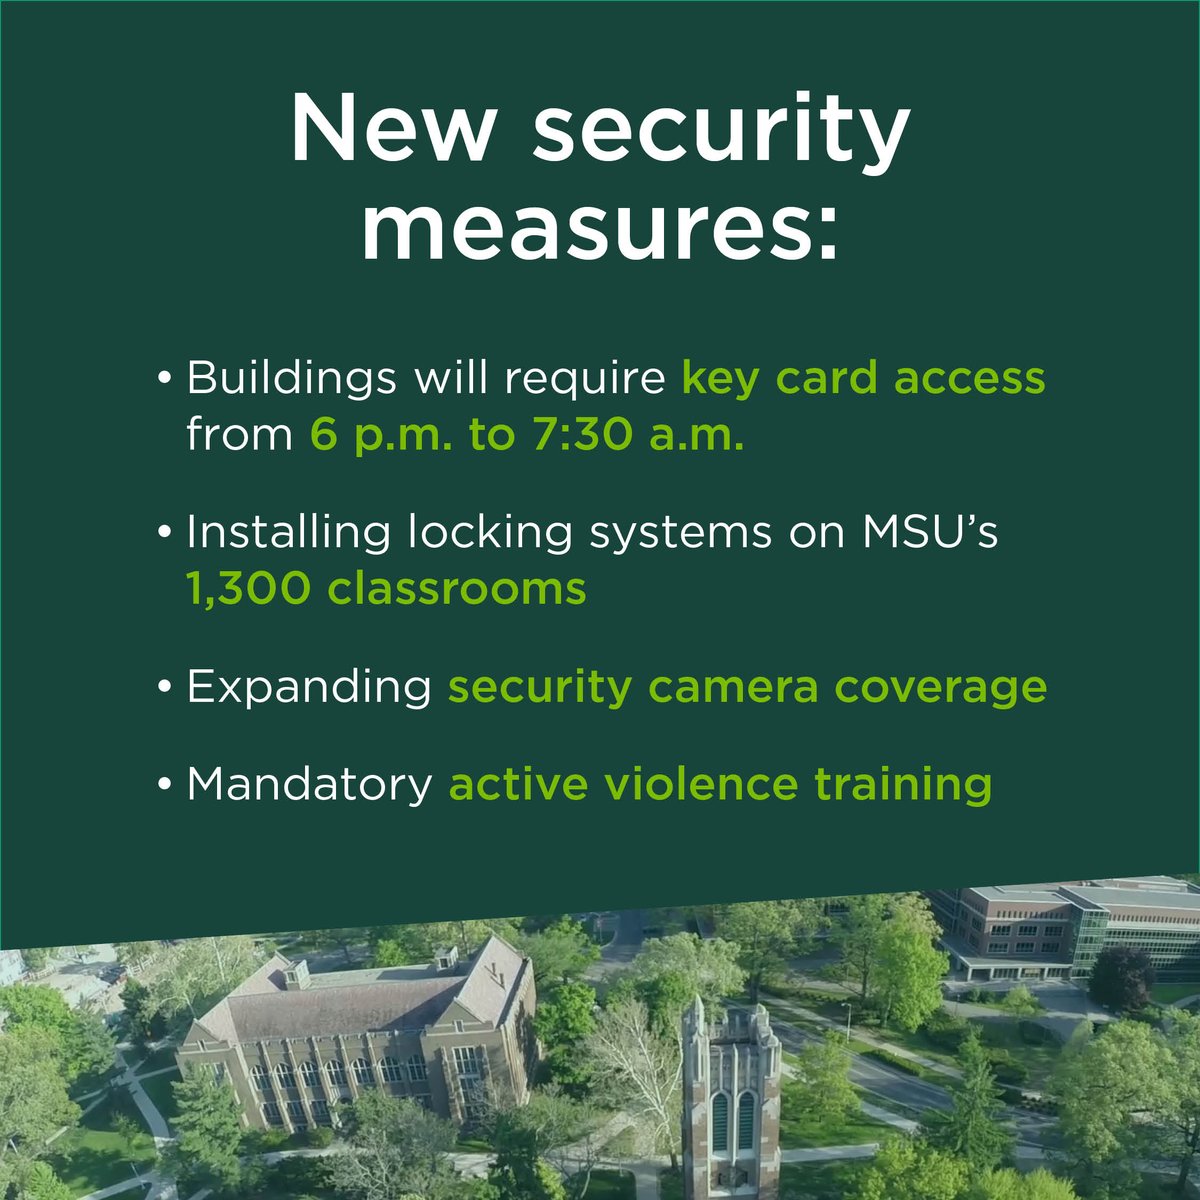 MSU will implement several changes to improve the safety and security of campus. go.msu.edu/75C5